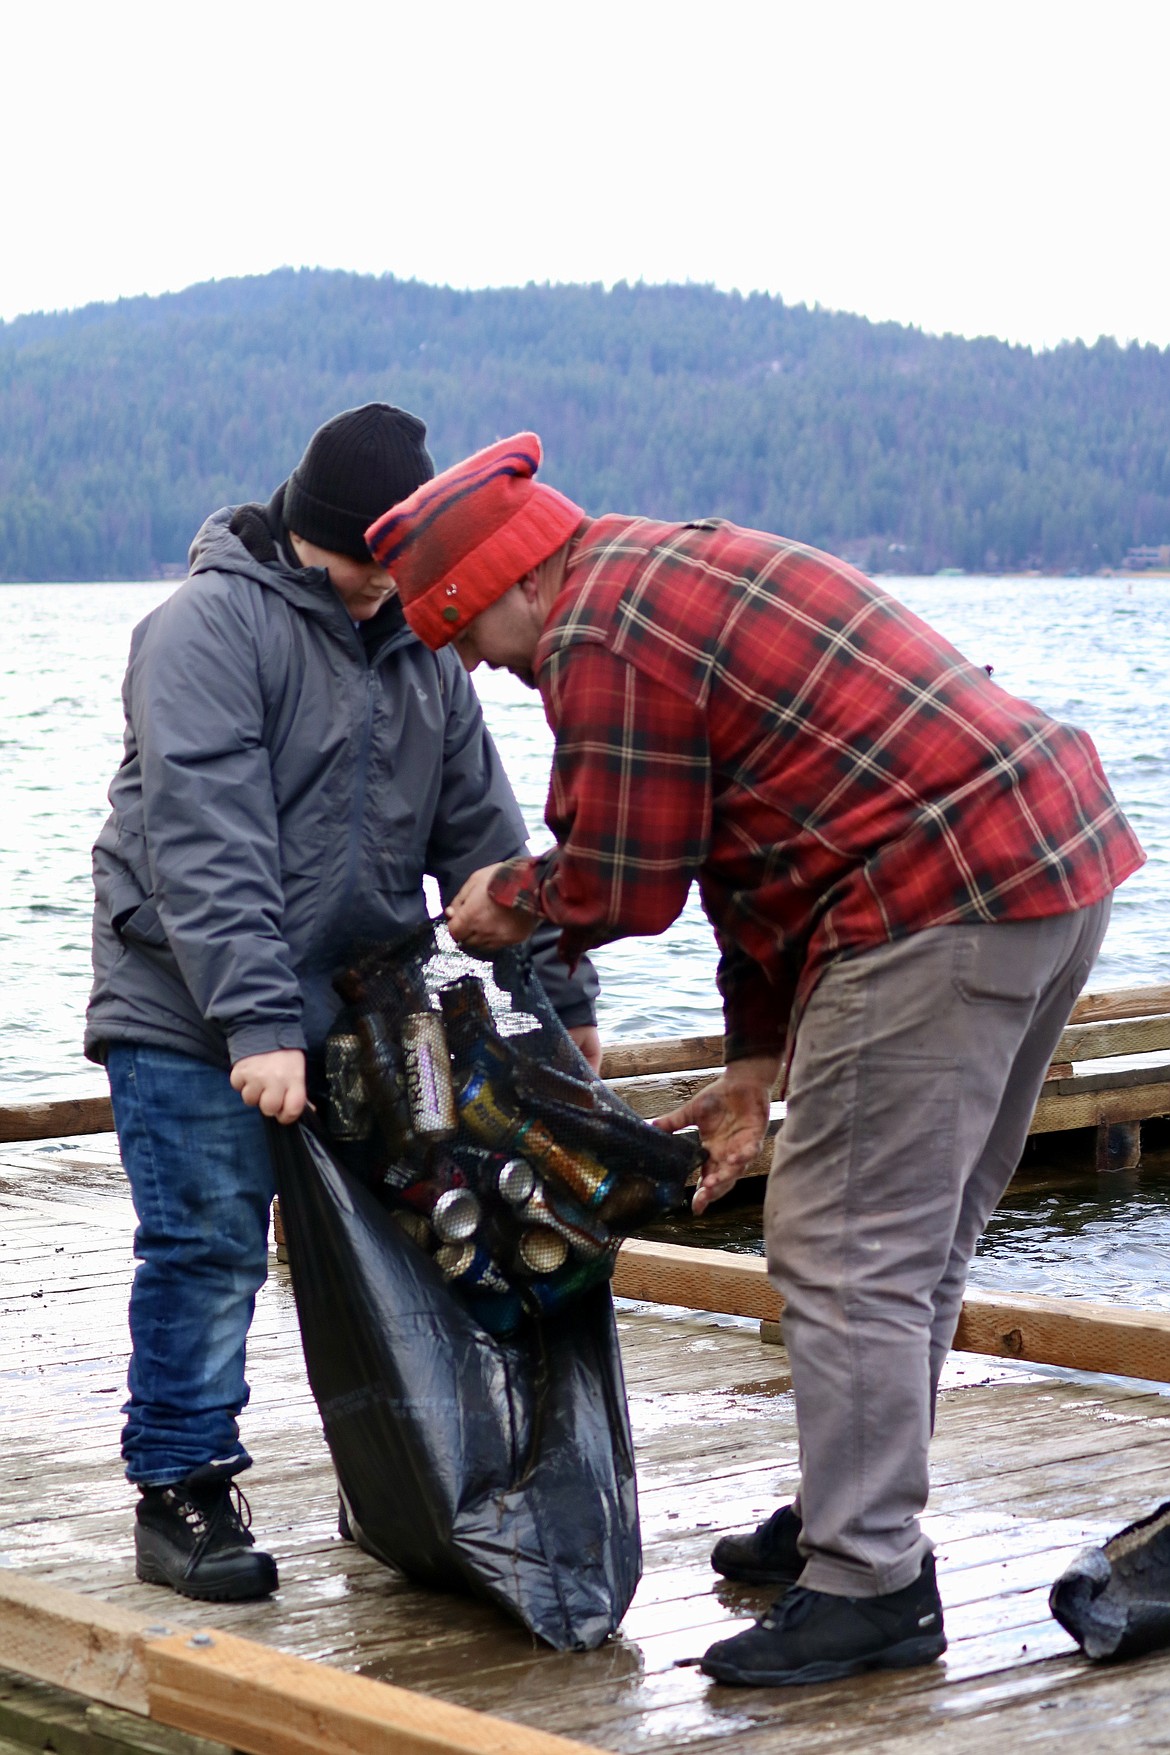 From left, 12-year-old Boyd Rada of Coeur d'Alene and Jasper Wilson of Post Falls volunteered their time to help with the underwater cleanup of Lake Coeur d'Alene on Wednesday. HANNAH NEFF/Press